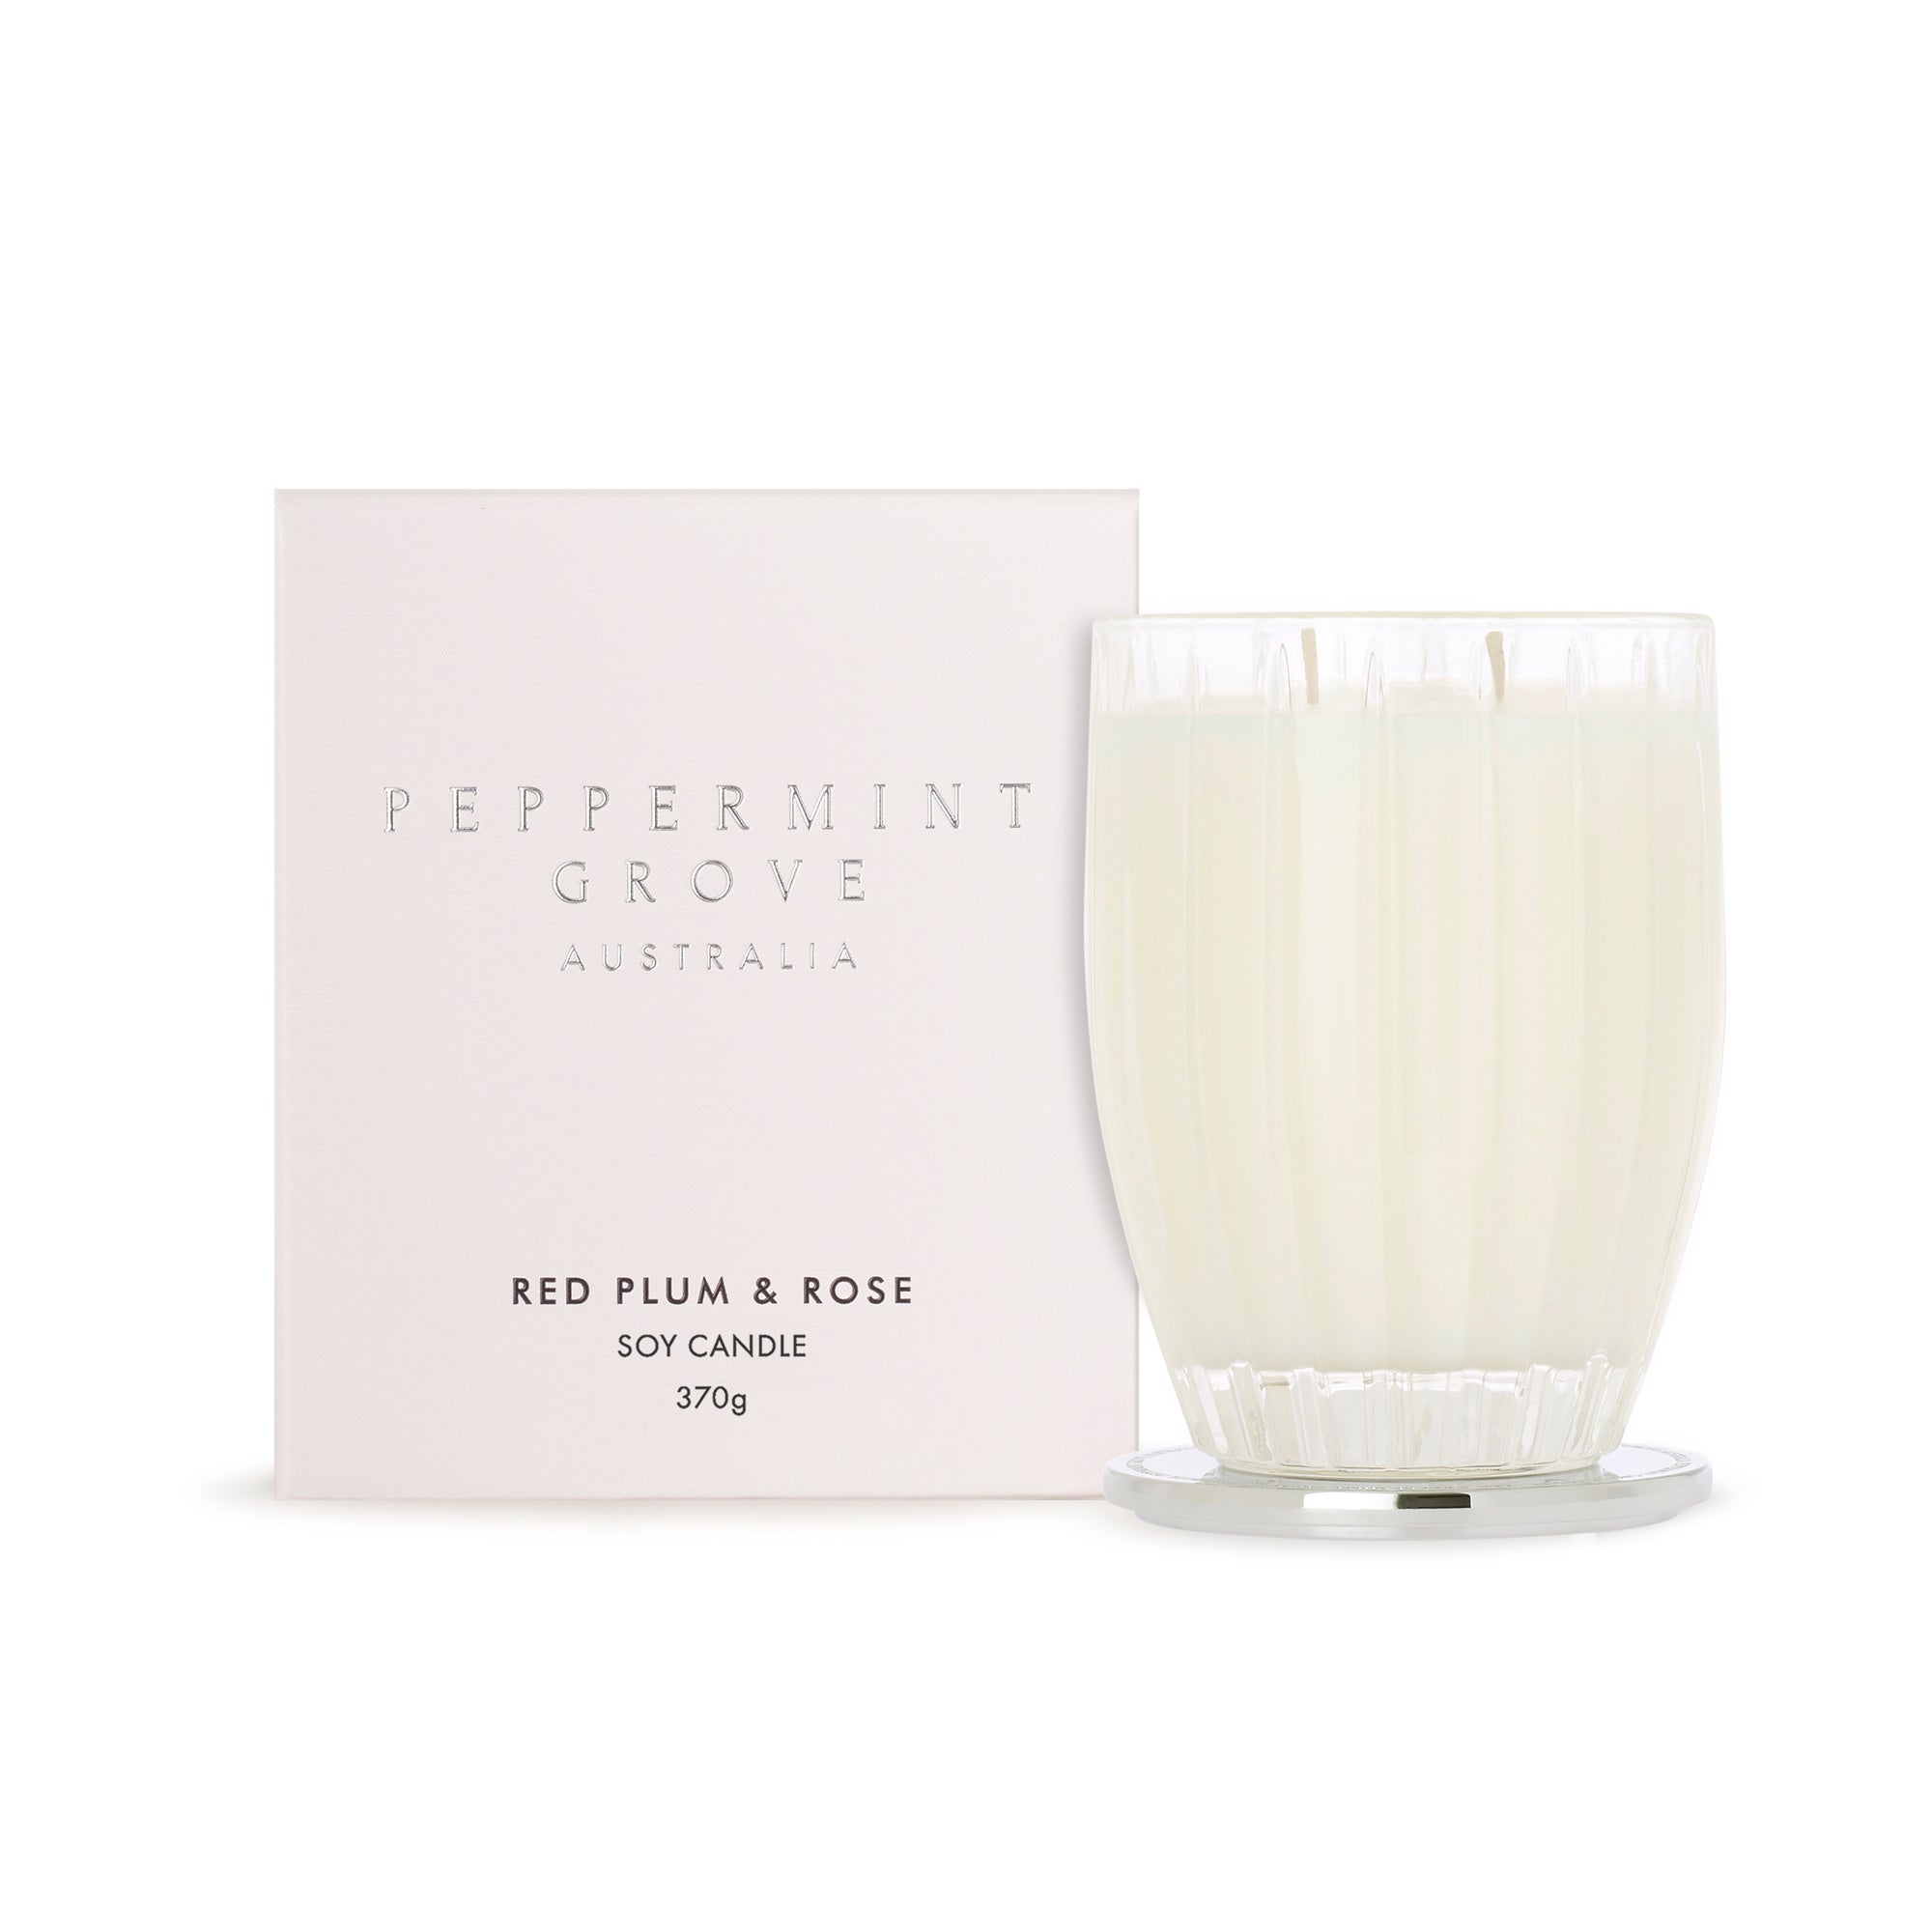 Peppermint Grove Red Plum & Rose Large Soy Candle 370g